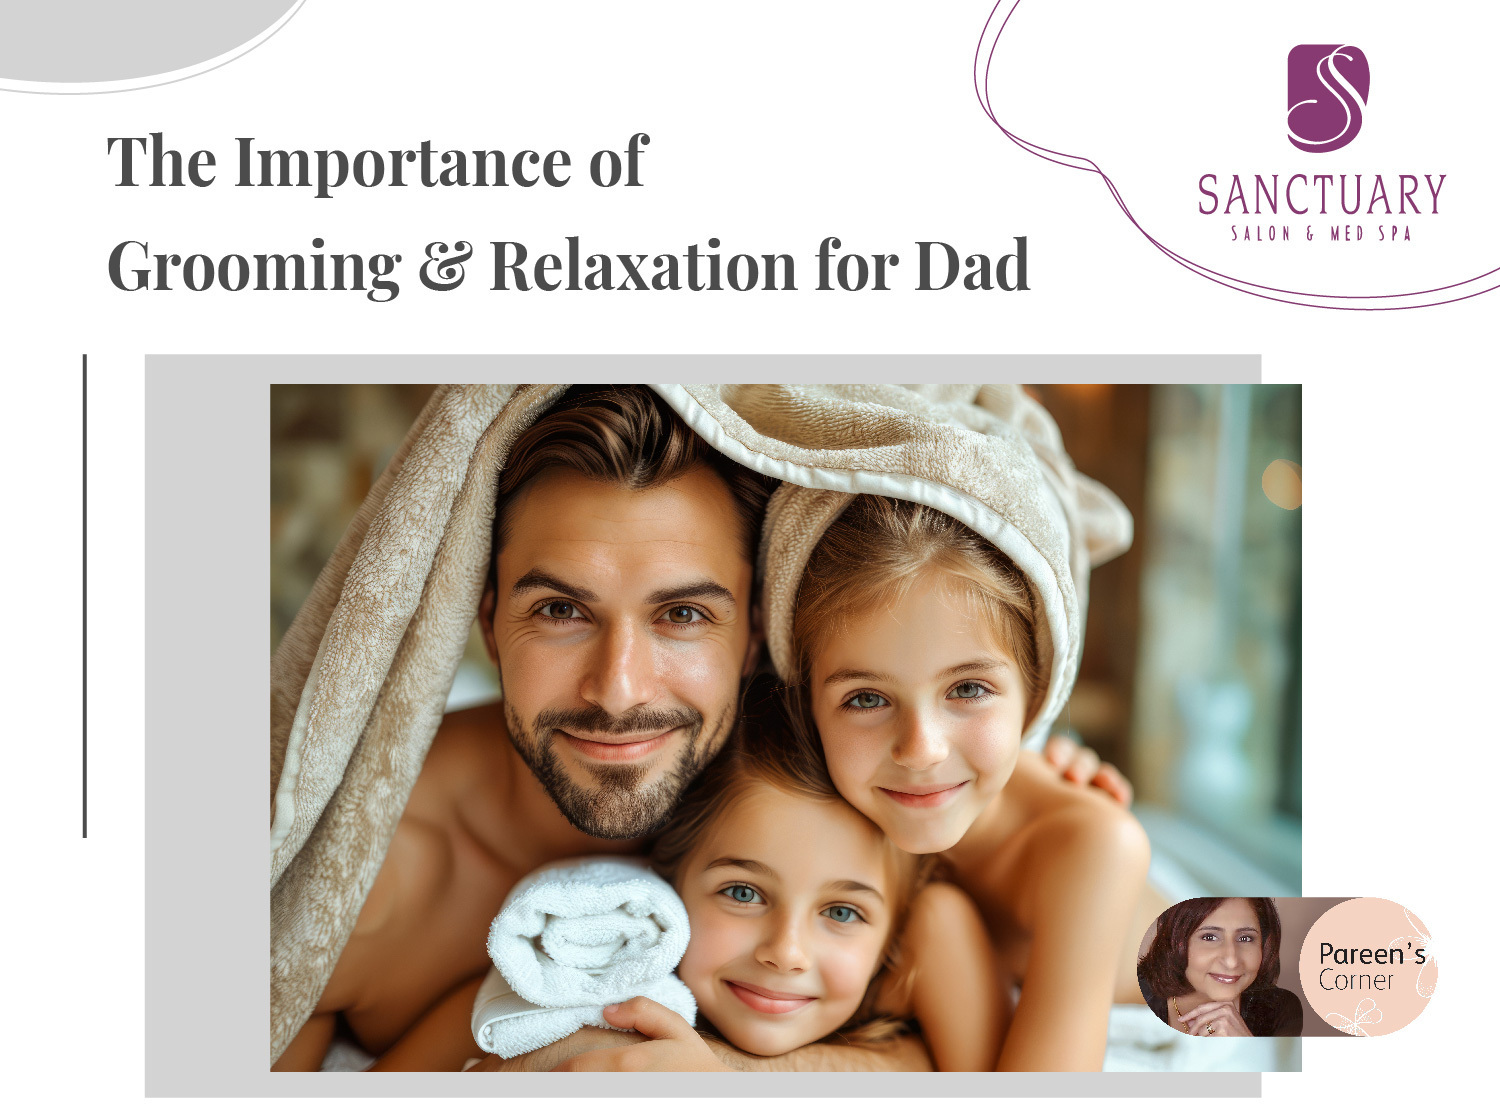 The Importance of Grooming & Relaxation for Dad